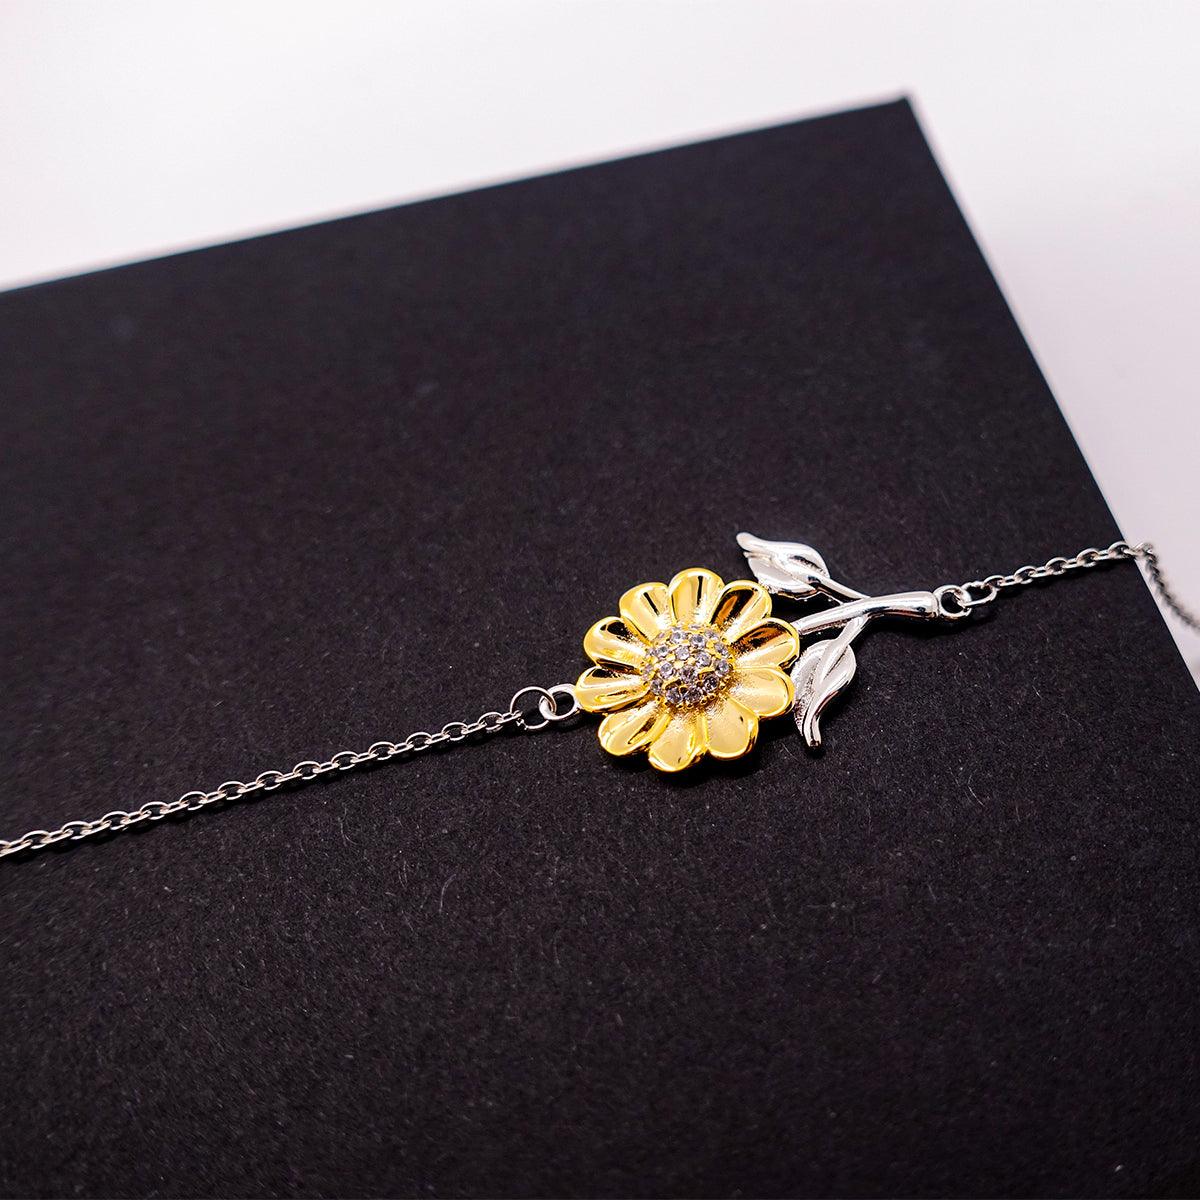 Sunflower Bracelet for Niece Present, Niece Always follow your dreams, never forget how amazing you are, Niece Birthday Christmas Gifts Jewelry for Girls Boys Teen Men Women - Mallard Moon Gift Shop